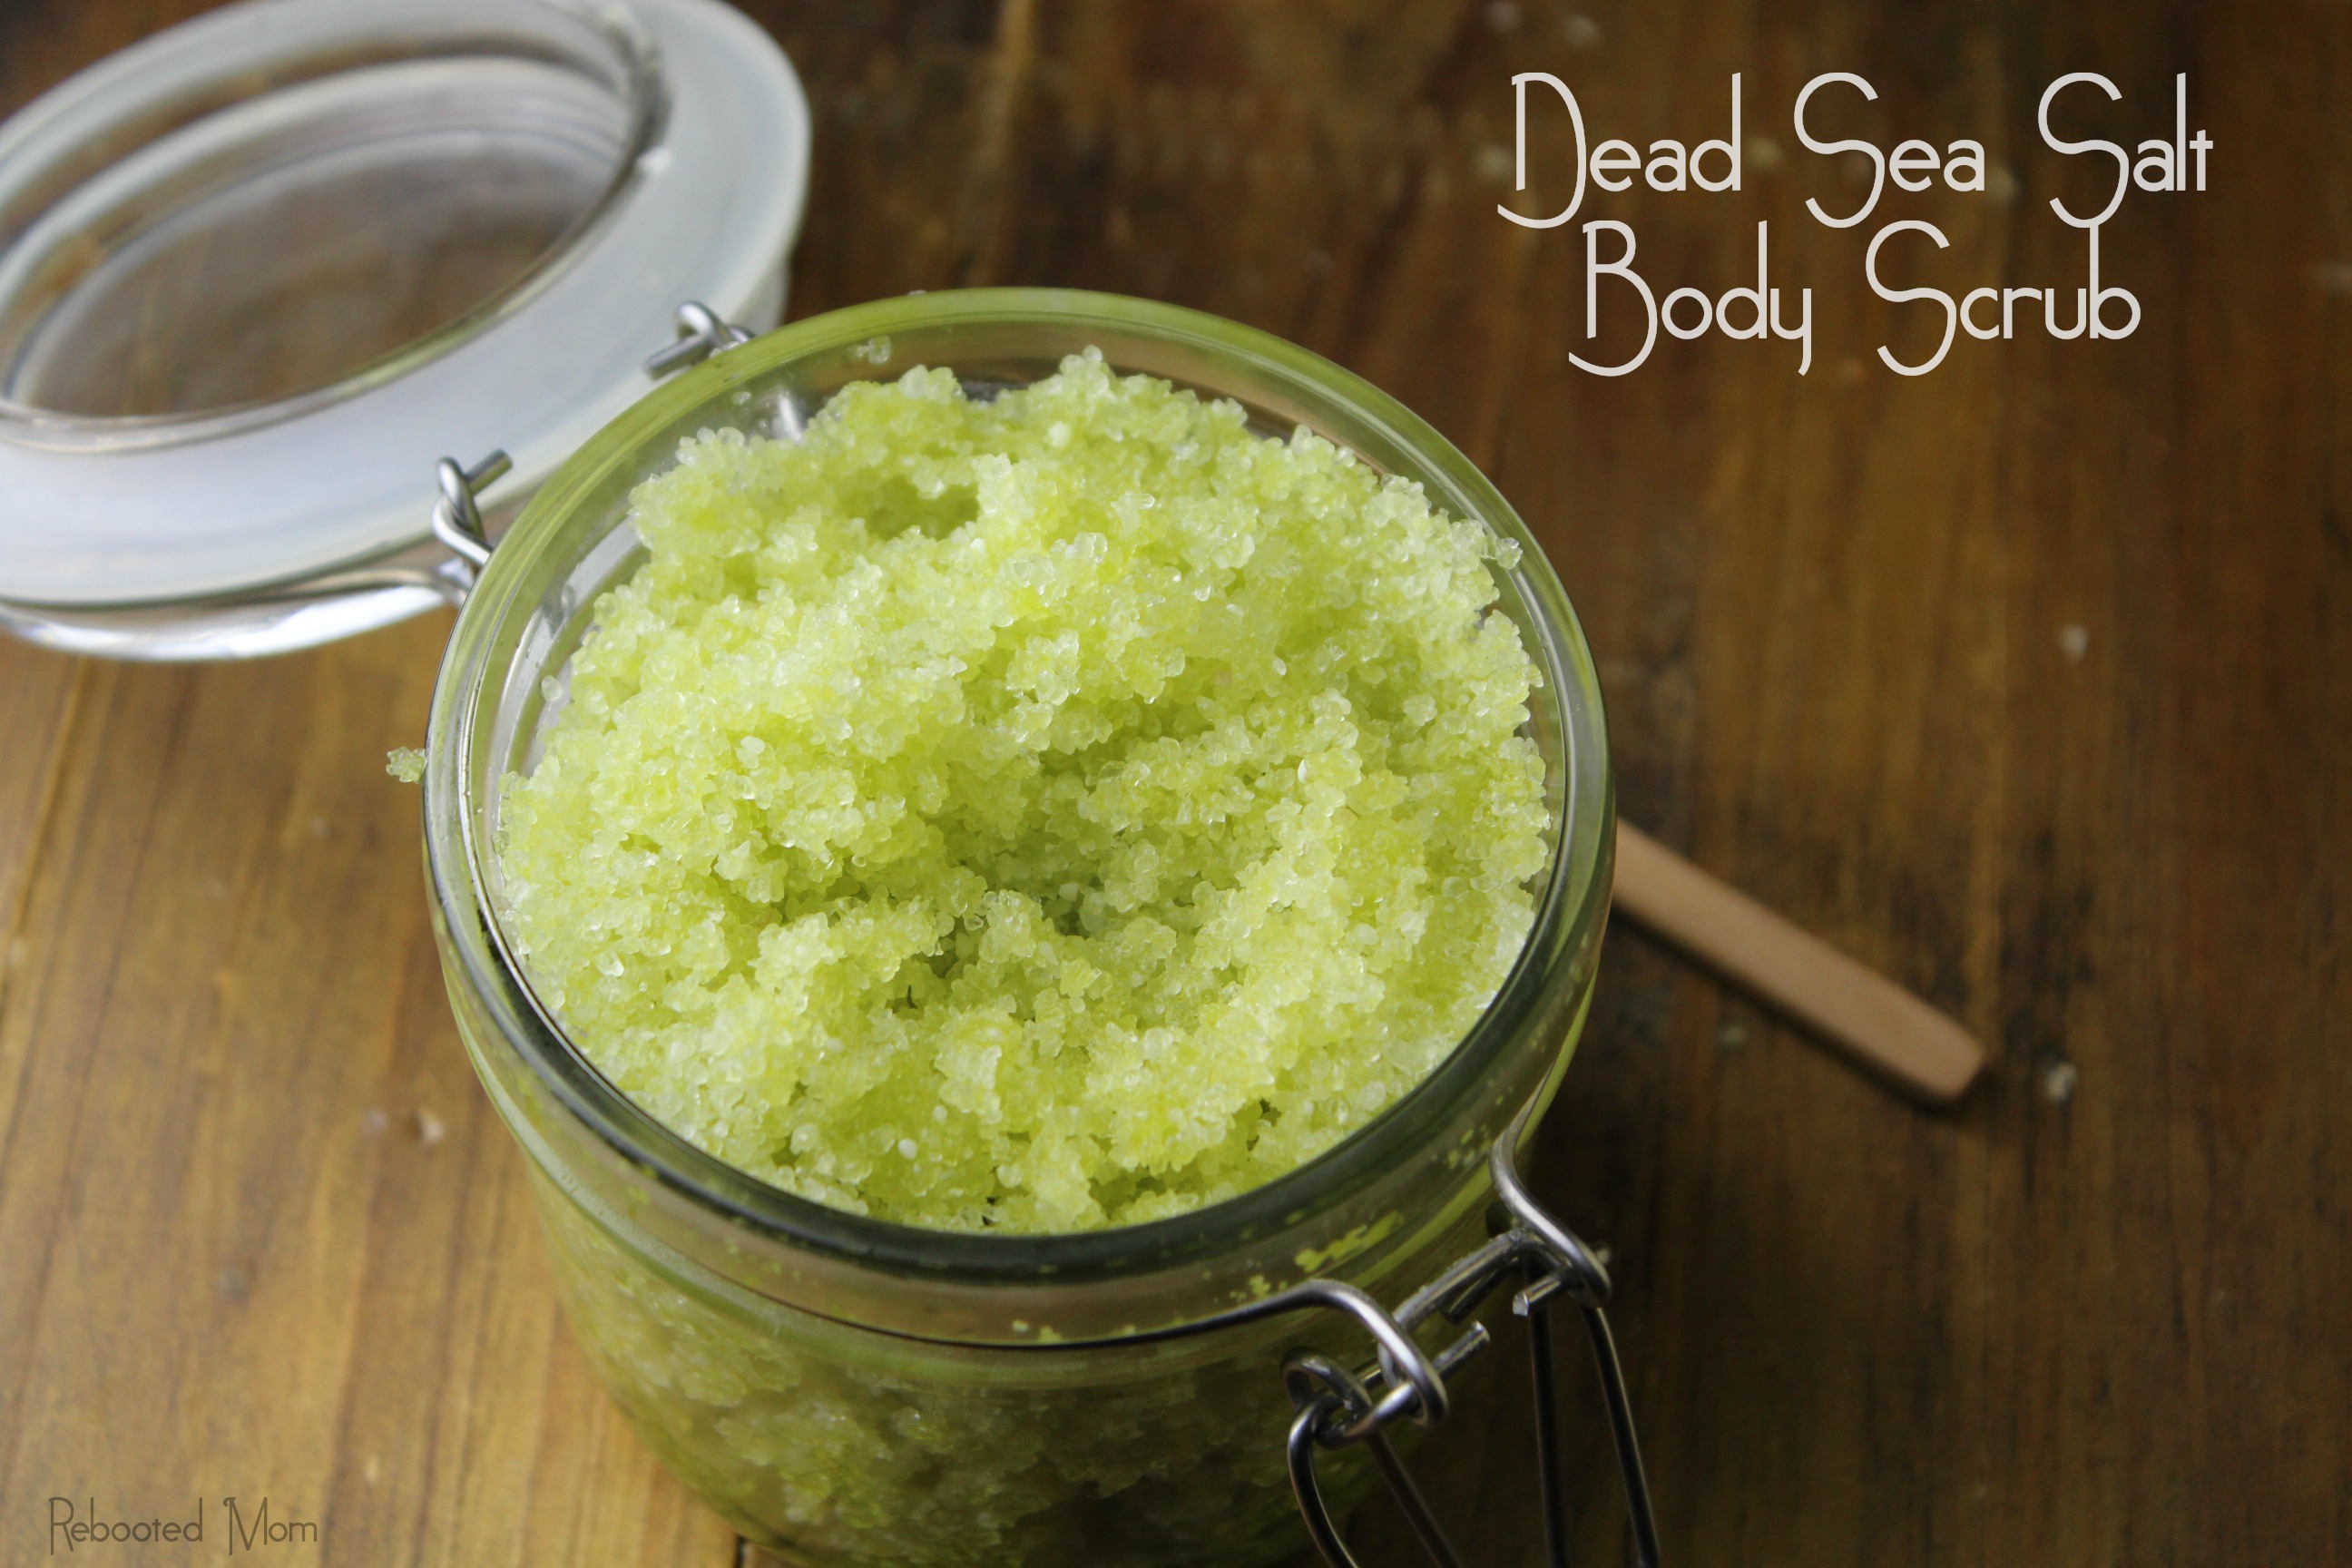 Mineral rich Dead Sea salt scrub, with natural, moisturizing oils perfect for gentle exfoliation and deep hydration of the skin.